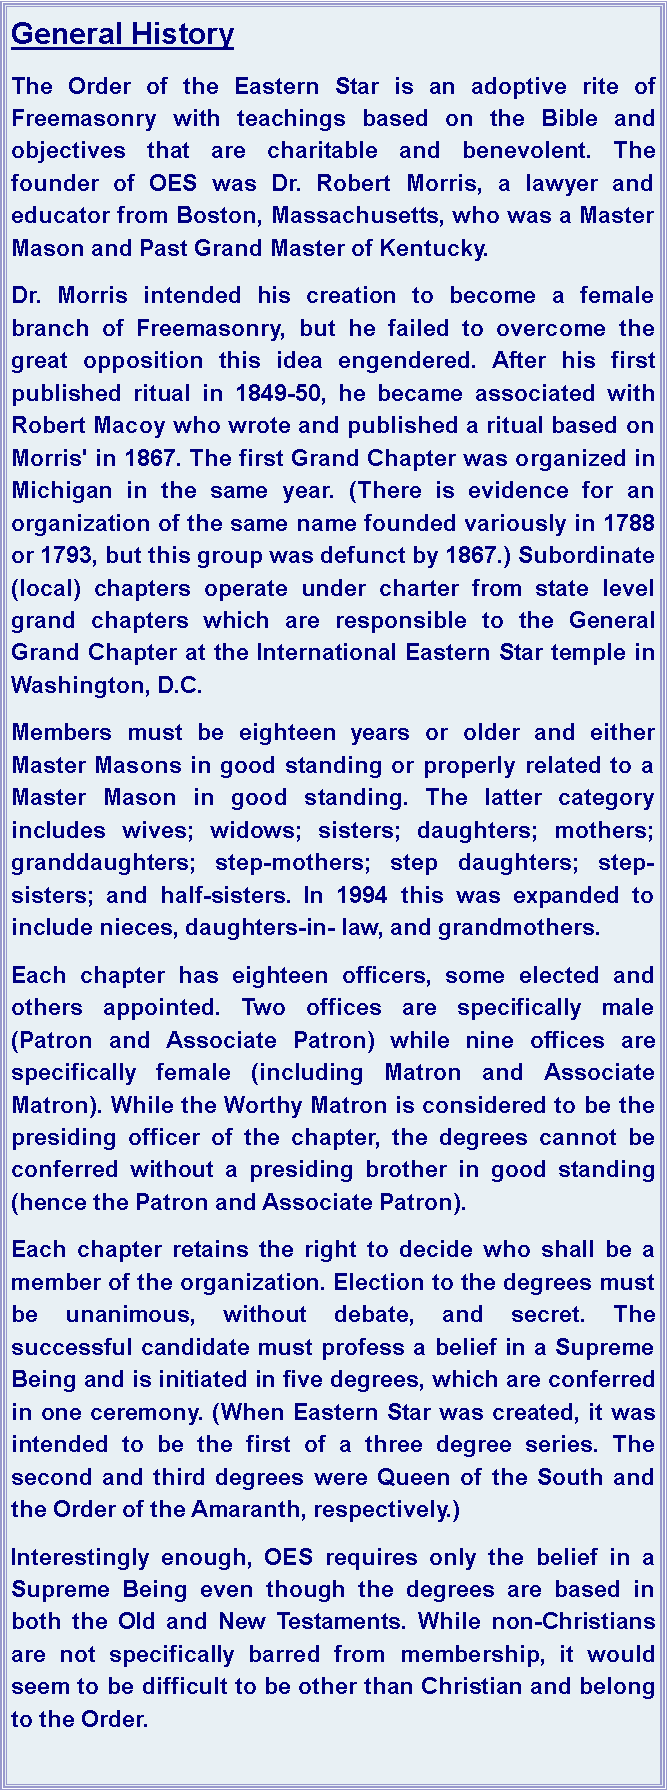 Text Box: General HistoryThe Order of the Eastern Star is an adoptive rite of Freemasonry with teachings based on the Bible and objectives that are charitable and benevolent. The founder of OES was Dr. Robert Morris, a lawyer and educator from Boston, Massachusetts, who was a Master Mason and Past Grand Master of Kentucky. Dr. Morris intended his creation to become a female branch of Freemasonry, but he failed to overcome the great opposition this idea engendered. After his first published ritual in 1849-50, he became associated with Robert Macoy who wrote and published a ritual based on Morris' in 1867. The first Grand Chapter was organized in Michigan in the same year. (There is evidence for an organization of the same name founded variously in 1788 or 1793, but this group was defunct by 1867.) Subordinate (local) chapters operate under charter from state level grand chapters which are responsible to the General Grand Chapter at the International Eastern Star temple in Washington, D.C.Members must be eighteen years or older and either Master Masons in good standing or properly related to a Master Mason in good standing. The latter category includes wives; widows; sisters; daughters; mothers; granddaughters; step-mothers; step daughters; step-sisters; and half-sisters. In 1994 this was expanded to include nieces, daughters-in- law, and grandmothers.Each chapter has eighteen officers, some elected and others appointed. Two offices are specifically male (Patron and Associate Patron) while nine offices are specifically female (including Matron and Associate Matron). While the Worthy Matron is considered to be the presiding officer of the chapter, the degrees cannot be conferred without a presiding brother in good standing (hence the Patron and Associate Patron).Each chapter retains the right to decide who shall be a member of the organization. Election to the degrees must be unanimous, without debate, and secret. The successful candidate must profess a belief in a Supreme Being and is initiated in five degrees, which are conferred in one ceremony. (When Eastern Star was created, it was intended to be the first of a three degree series. The second and third degrees were Queen of the South and the Order of the Amaranth, respectively.)Interestingly enough, OES requires only the belief in a Supreme Being even though the degrees are based in both the Old and New Testaments. While non-Christians are not specifically barred from membership, it would seem to be difficult to be other than Christian and belong to the Order.